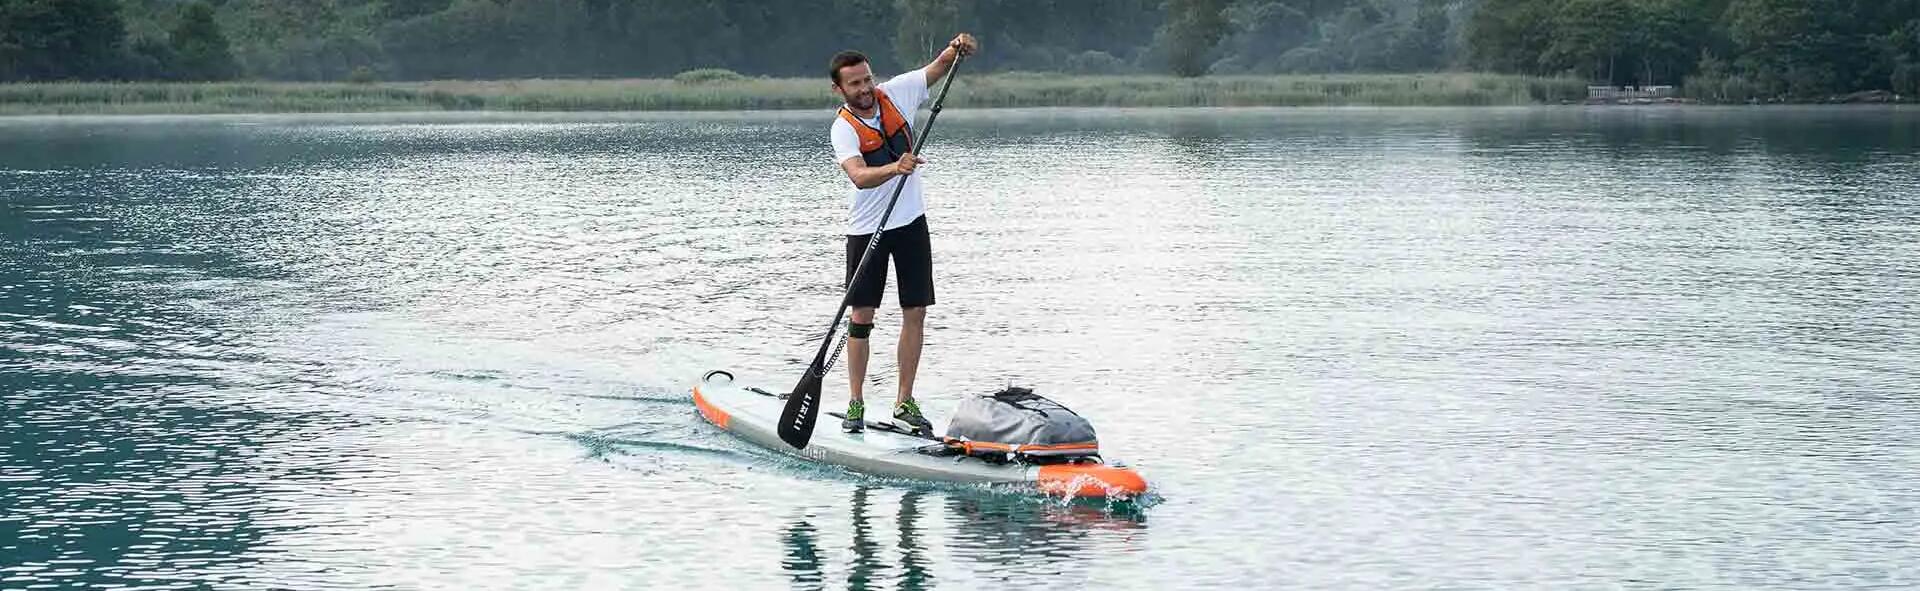 stand-up-paddle-decouvrir